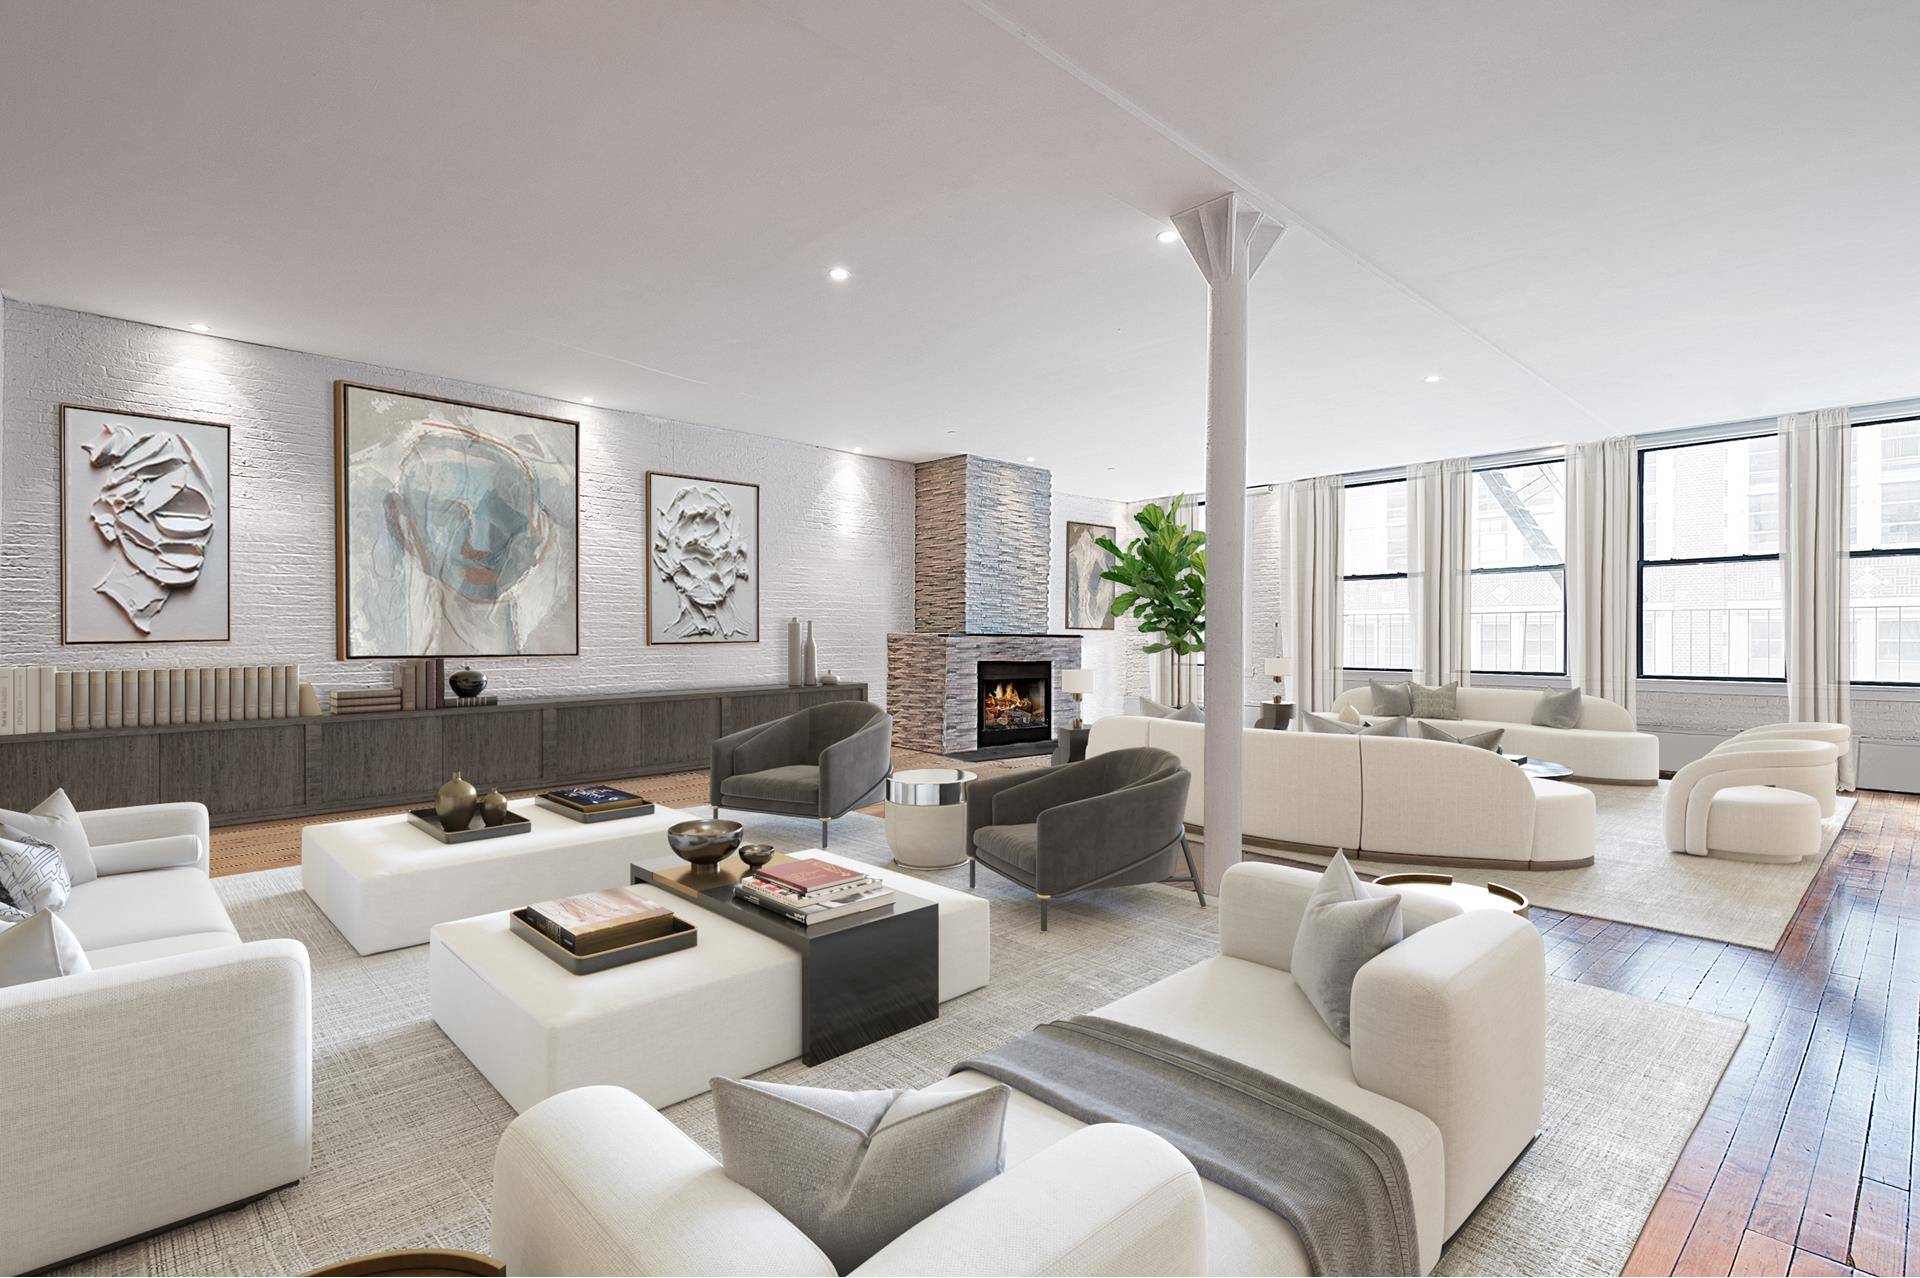 MASSIVE and exquisite 3800 square foot private full floor condo loft with brand new multi million dollar gut renovation in the Gramercy area that has also been featured on Gossip ...